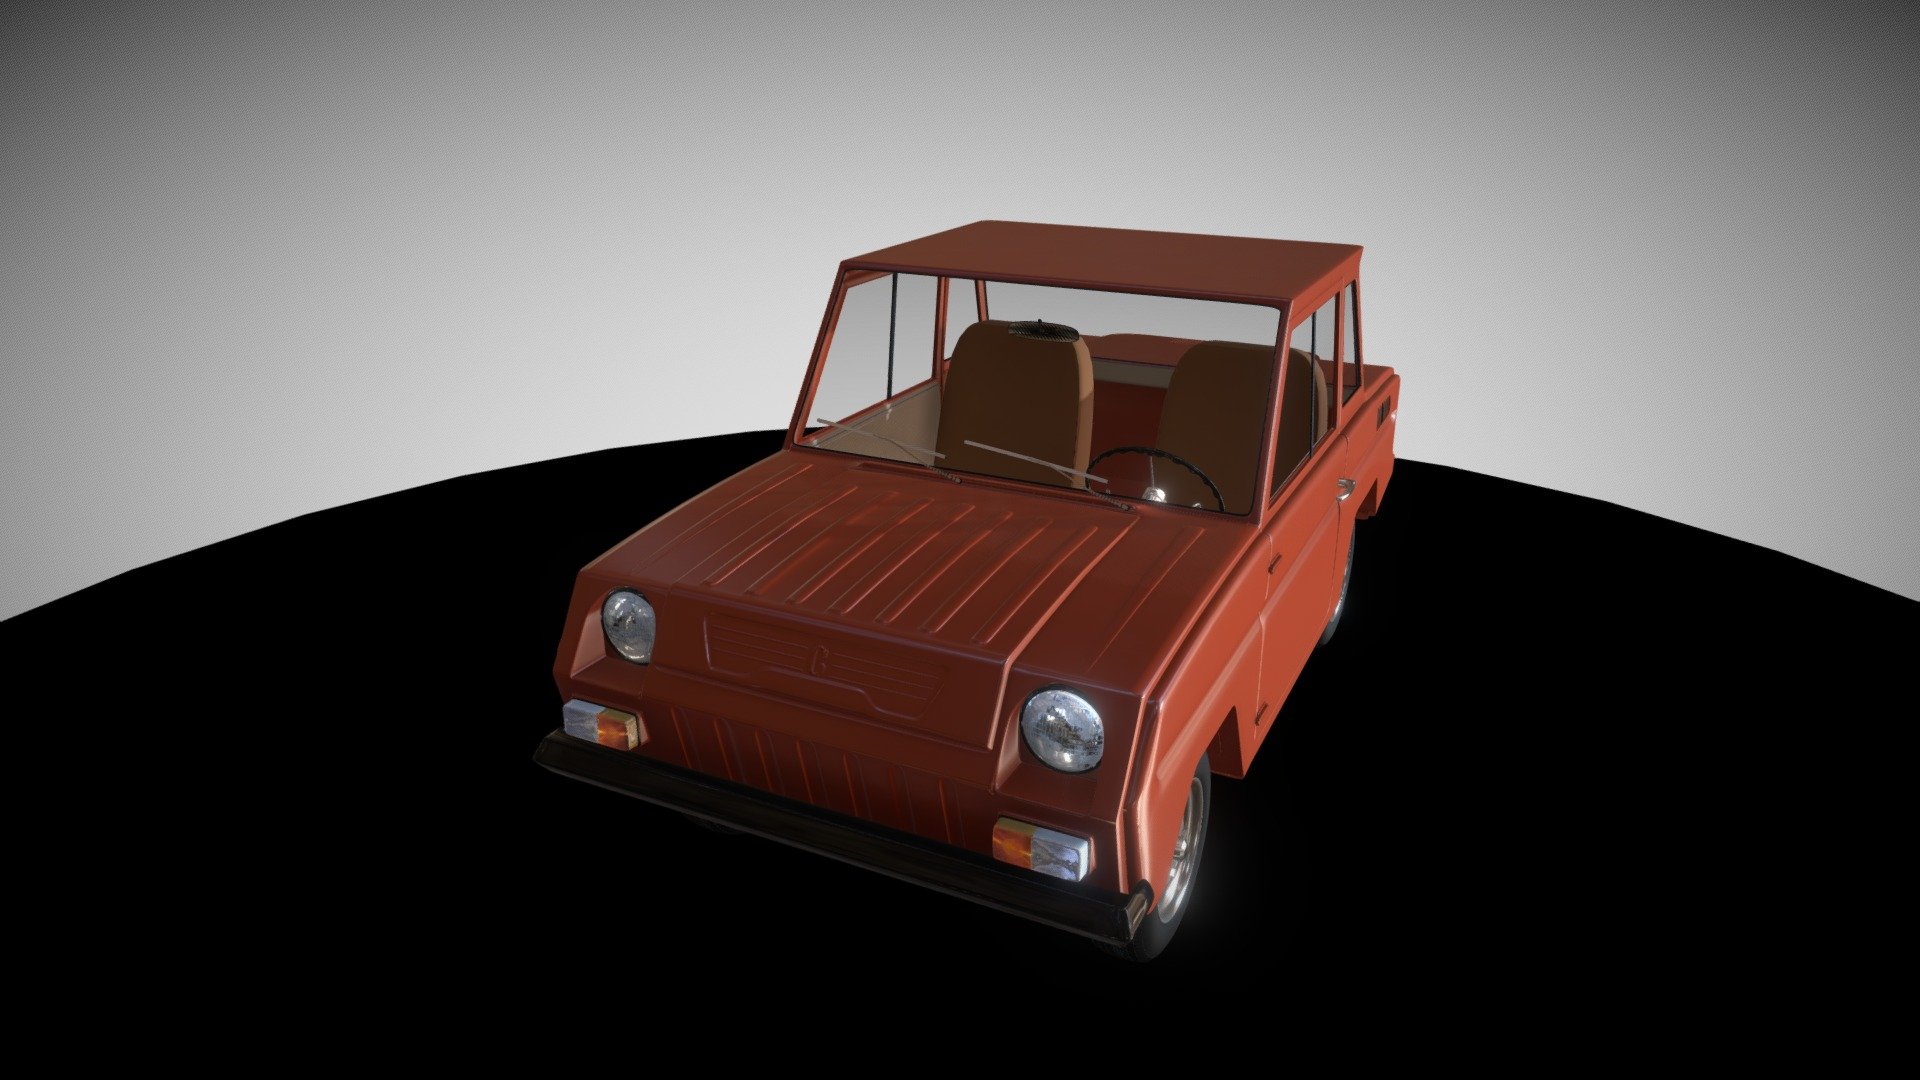 Hight-poly model of vintage soviet car SMZ-S3D. This model has an interior, motor, and baggage area. 
Picture from Blender render:
 - Vintage soviet car SMZ-S3D (Invalidka) - 3D model by IliaA (@andreev.il) 3d model